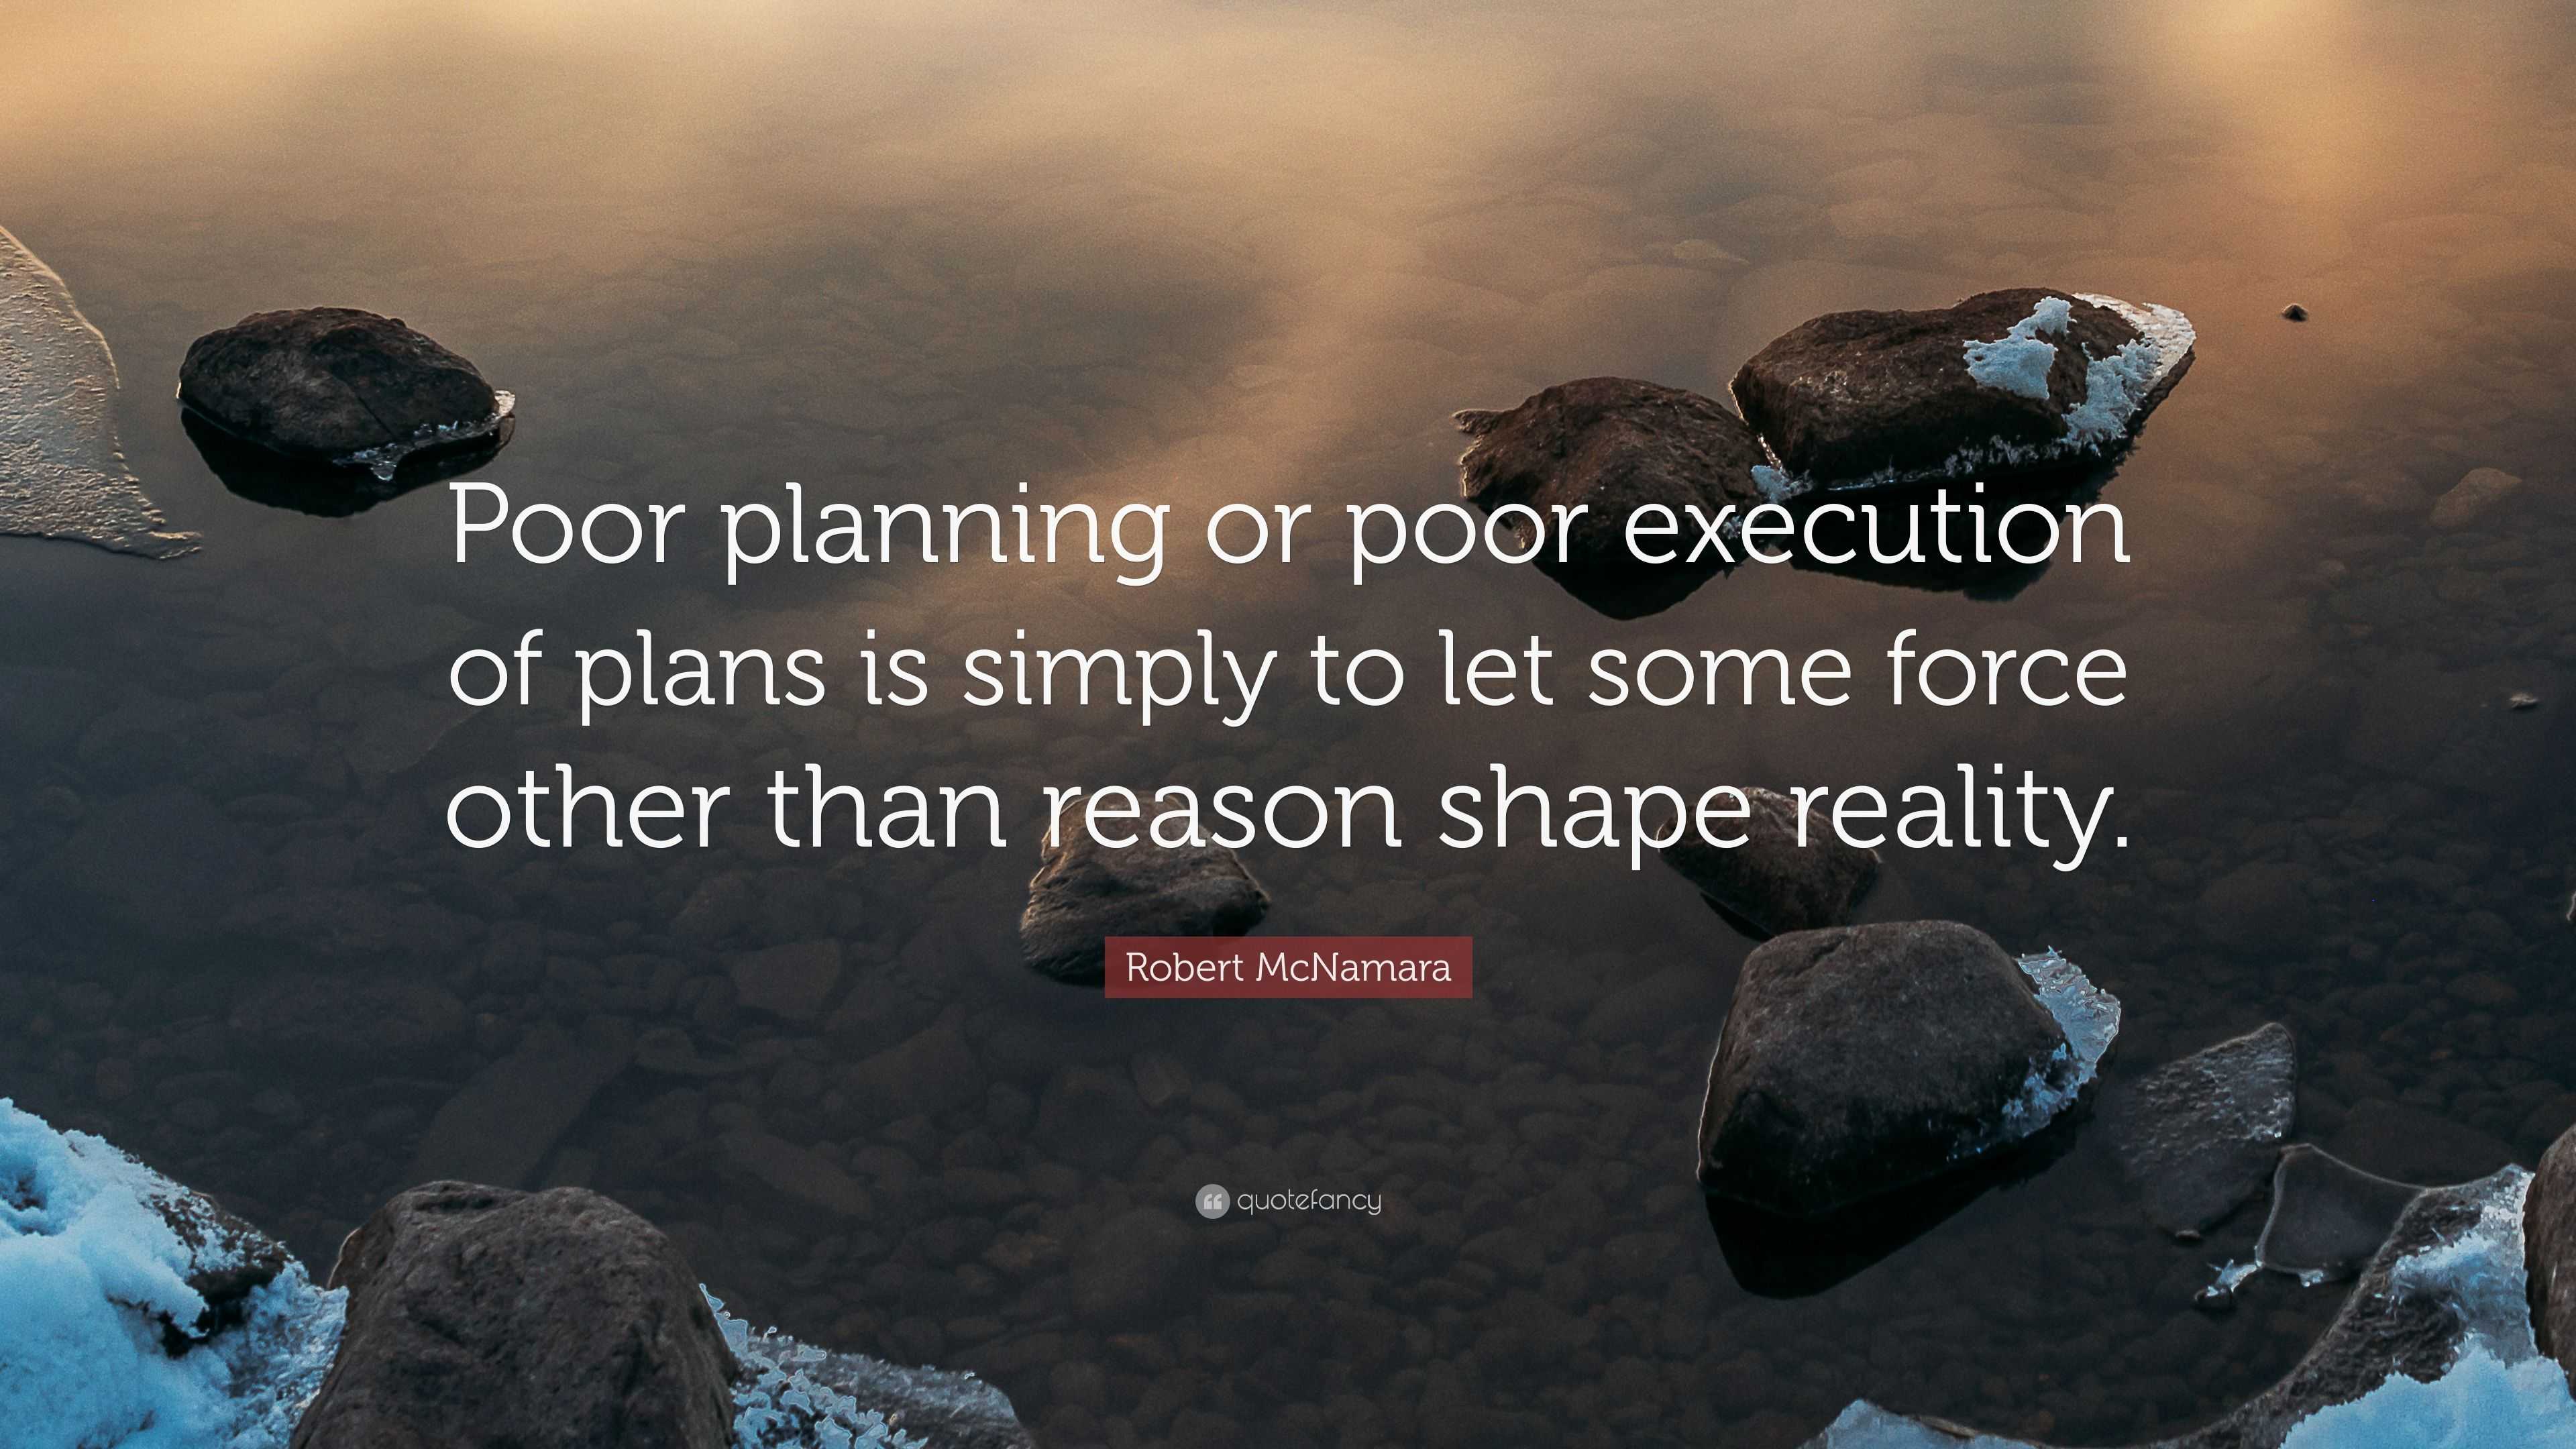 no business plan or poor planning